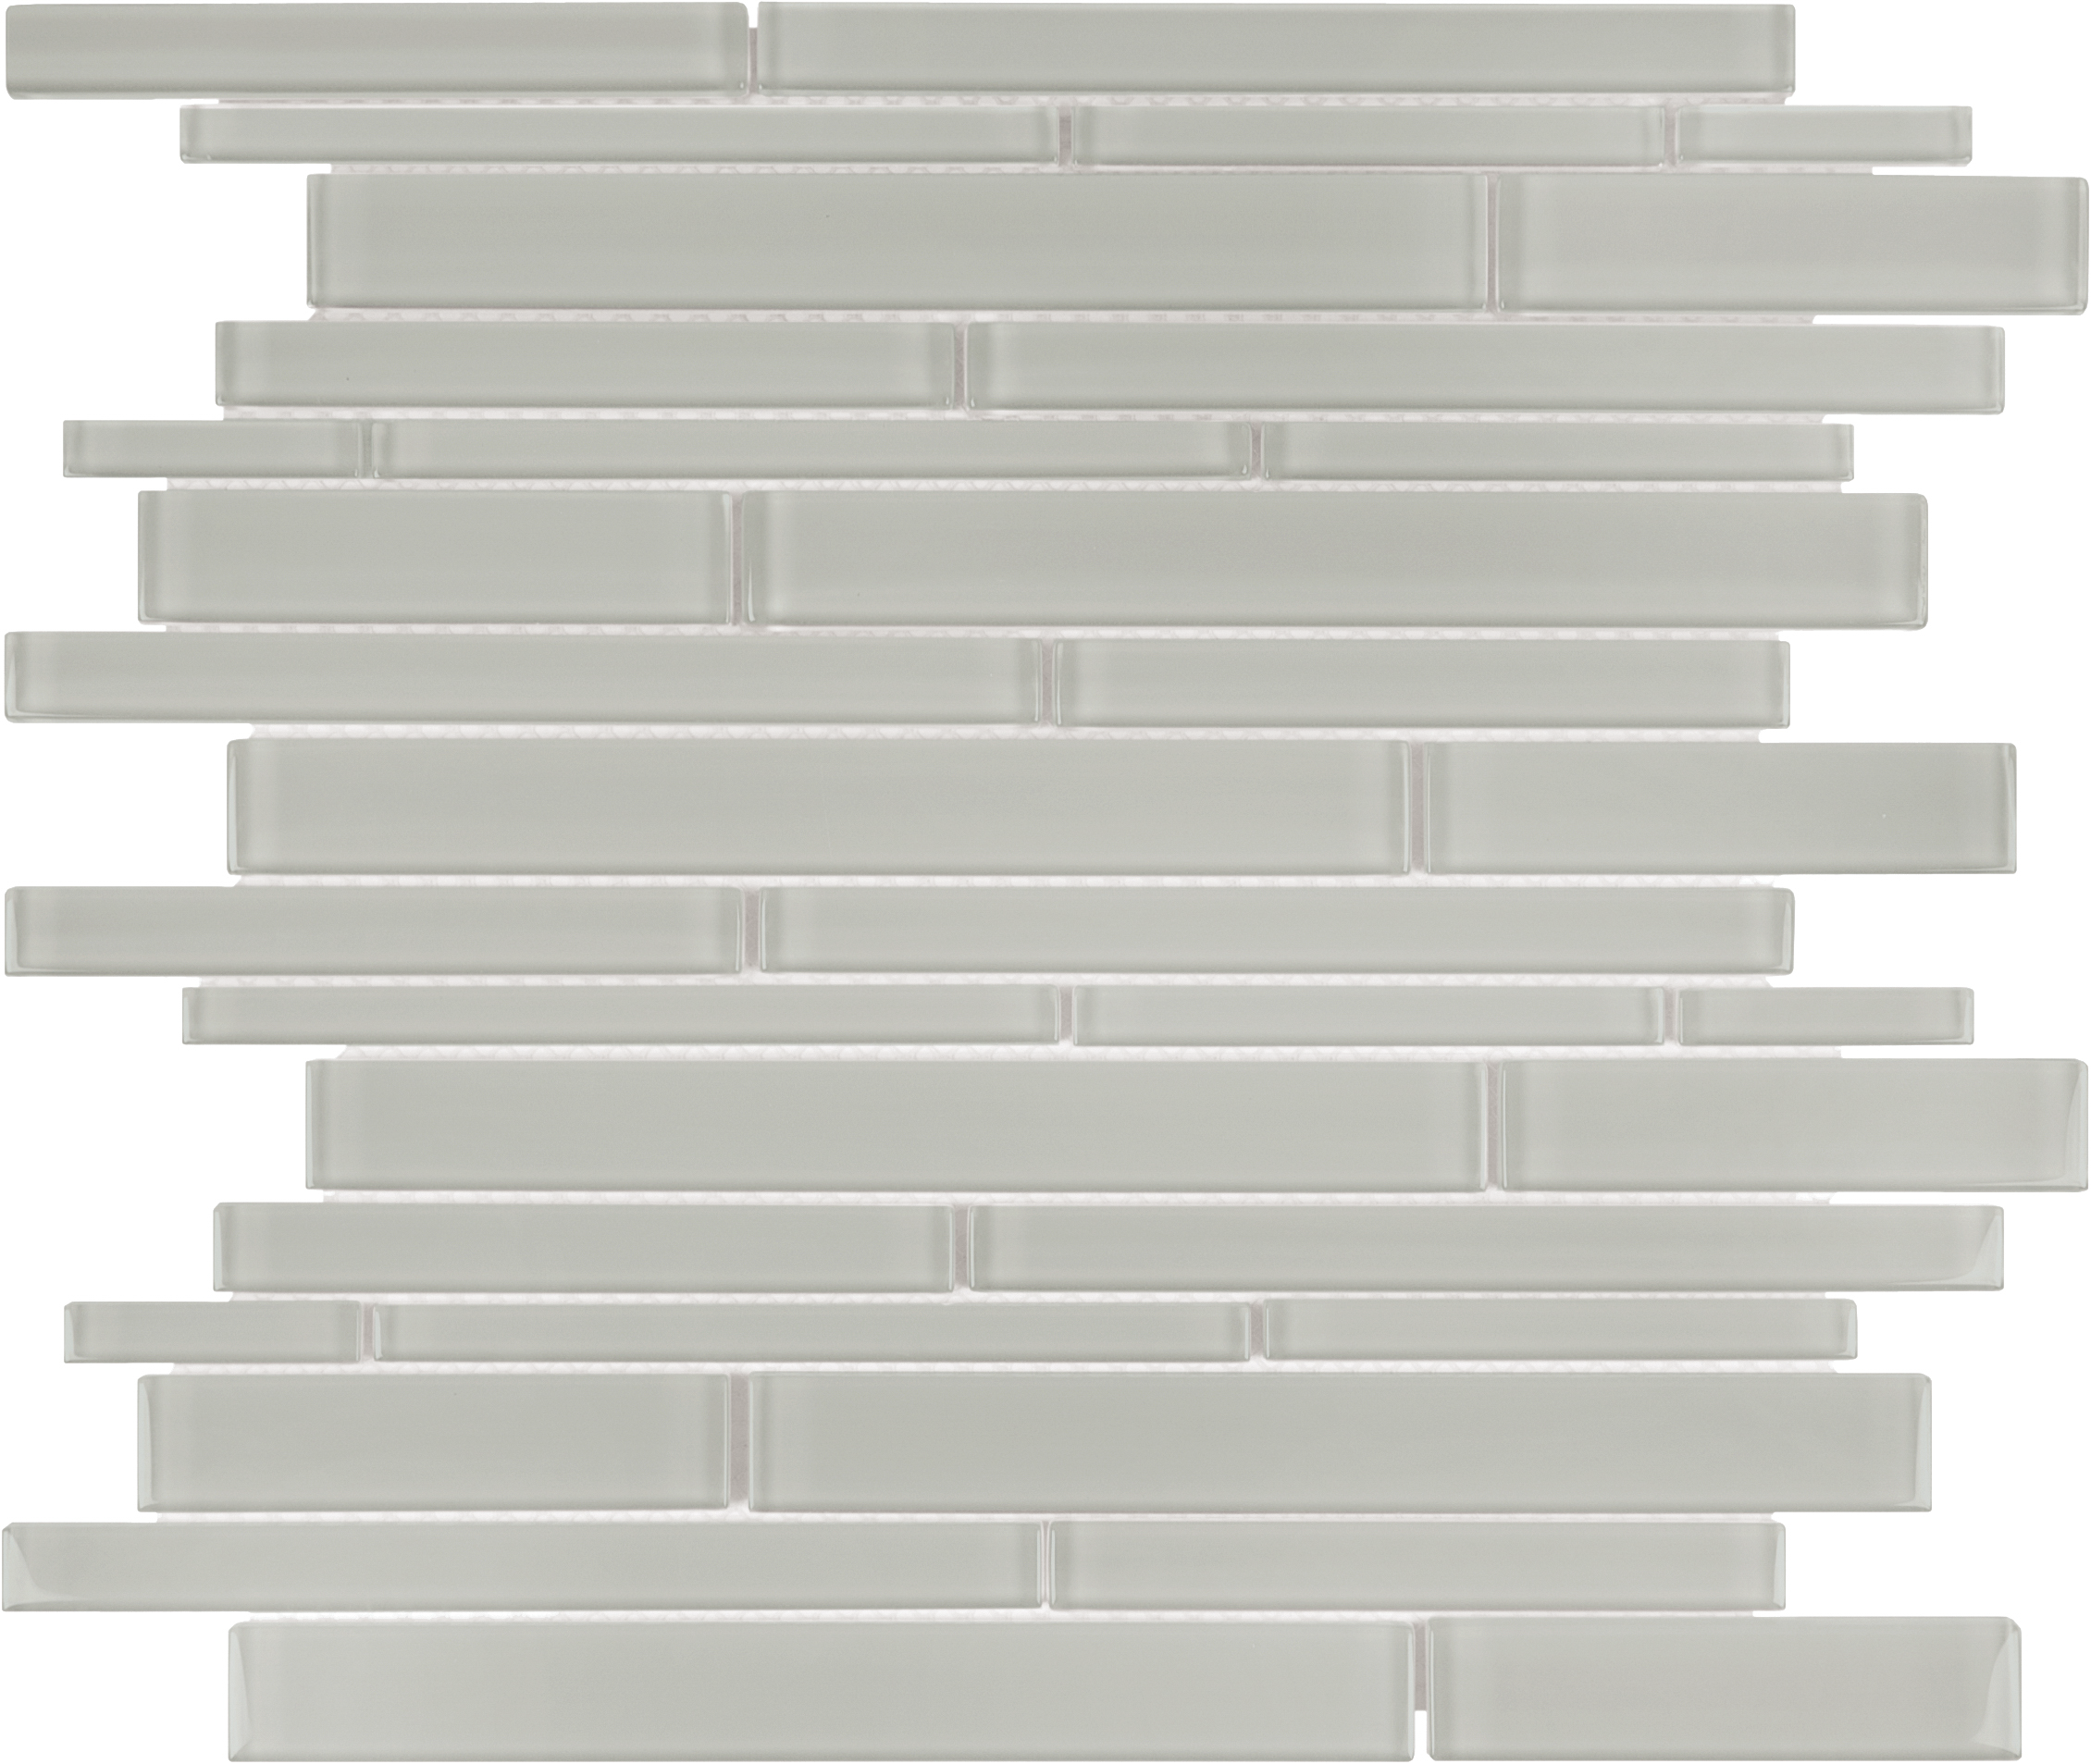 mist random strip pattern fused glass mosaic from element anatolia collection distributed by surface group international glossy finish rounded edge mesh shape